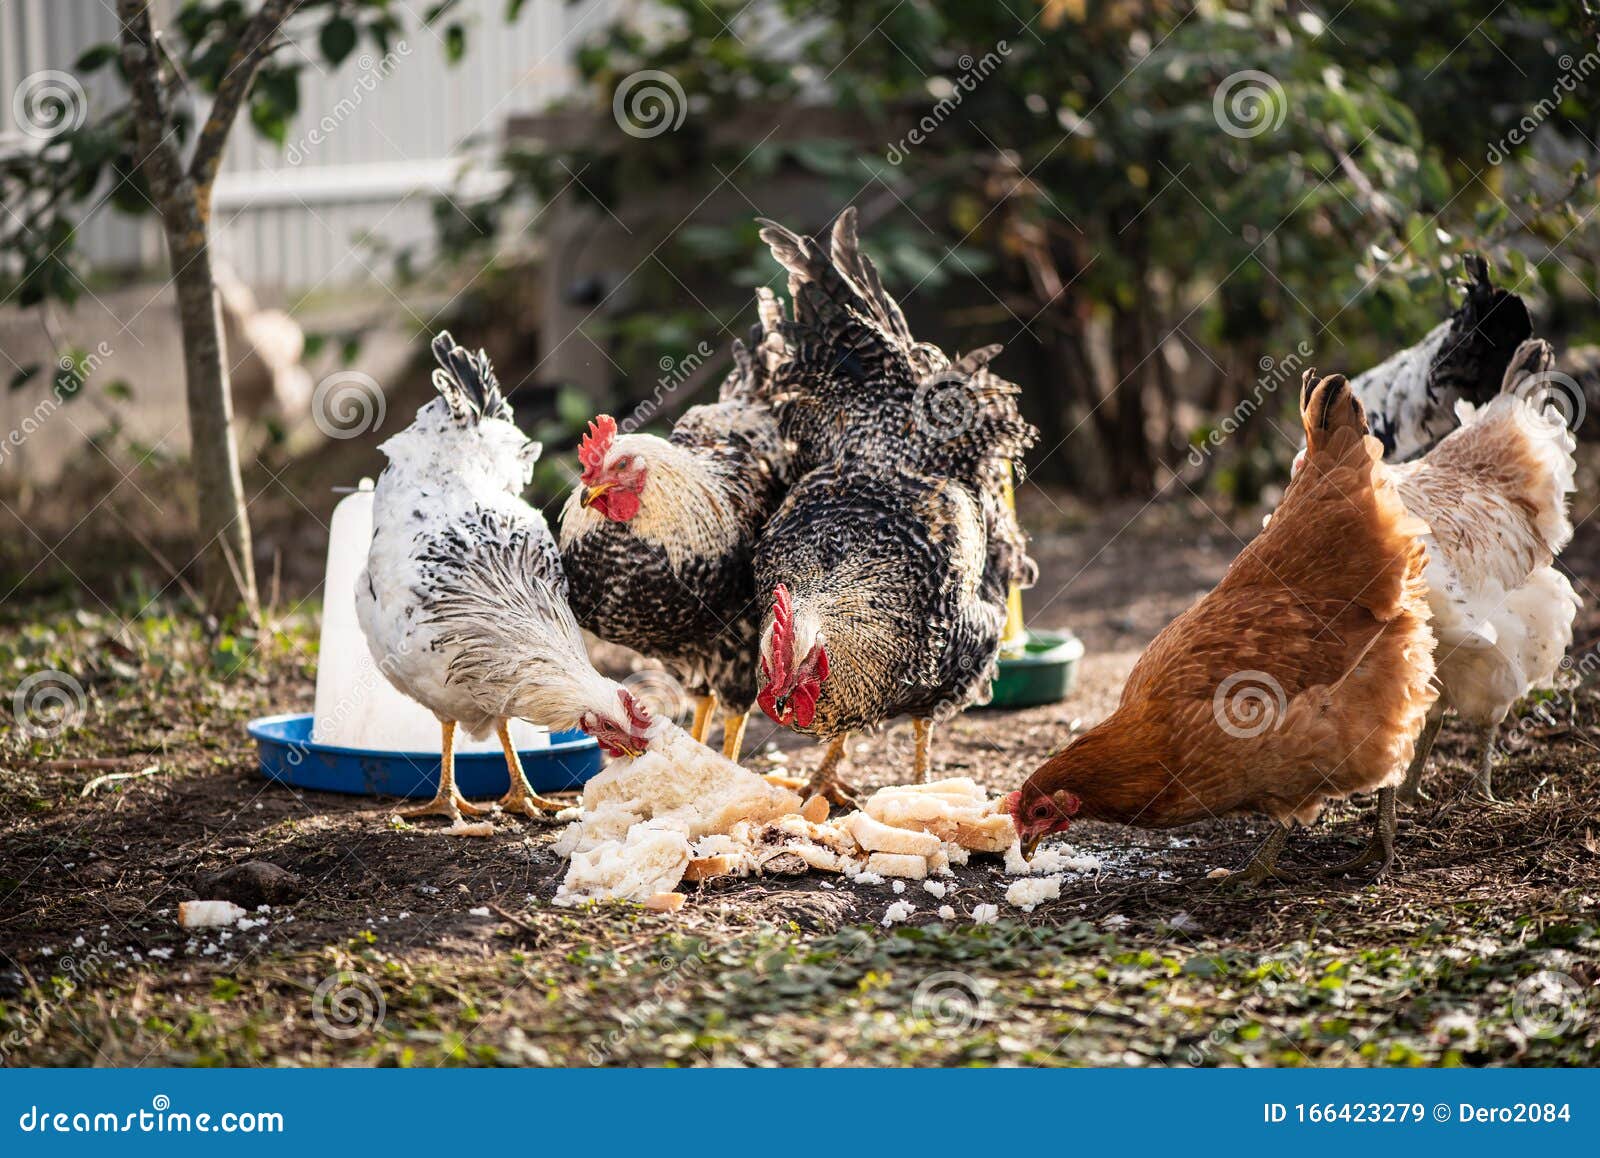 chickens and roosters eating, life in the hencoop. growing a healthy bird without gmo